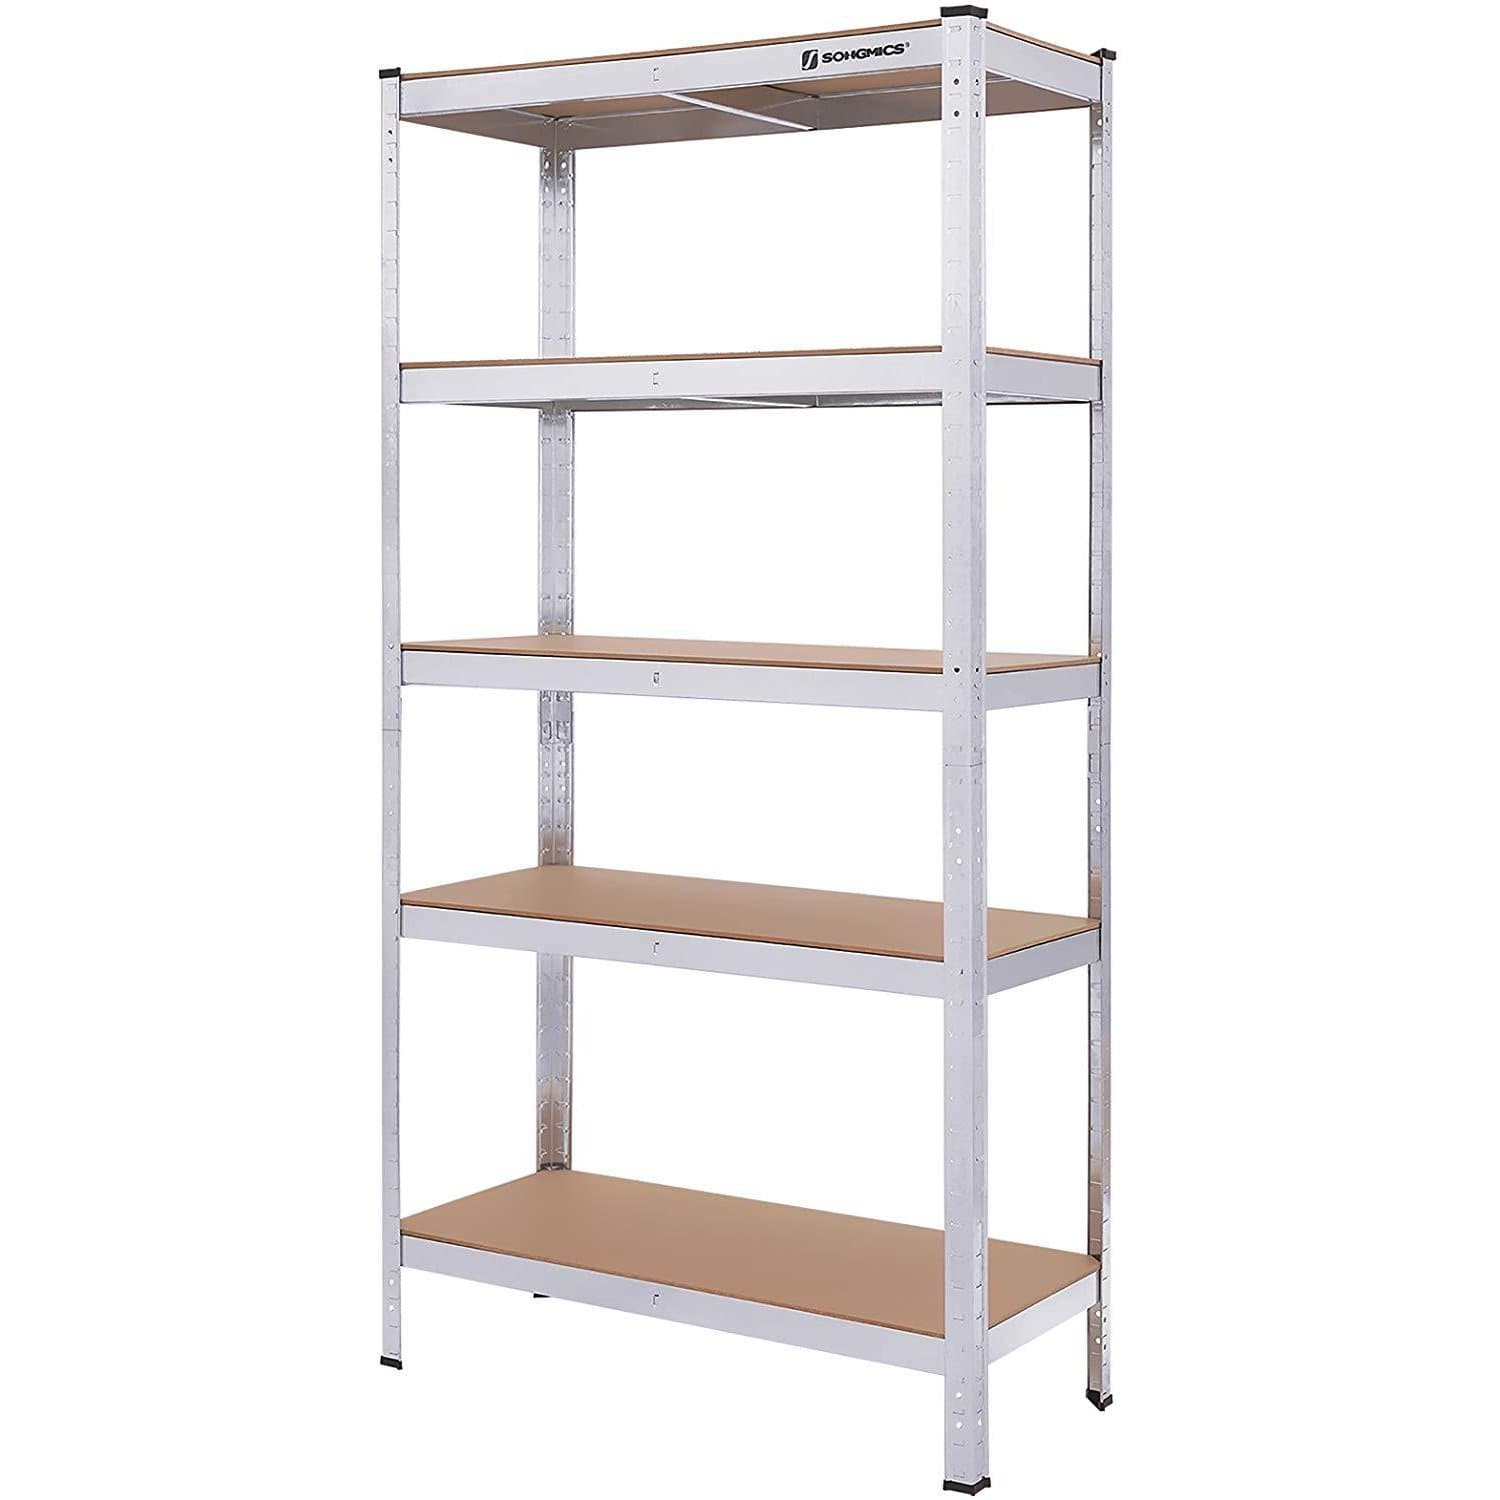 Nancy's Warehouse Rack - Shelving Cabinets - Workbench - Storage Rack - For Garage, Basement or Shed - Rack for Tool Storage - 180 x 90 x 40 cm - Max. Carrying capacity: 875 KG 